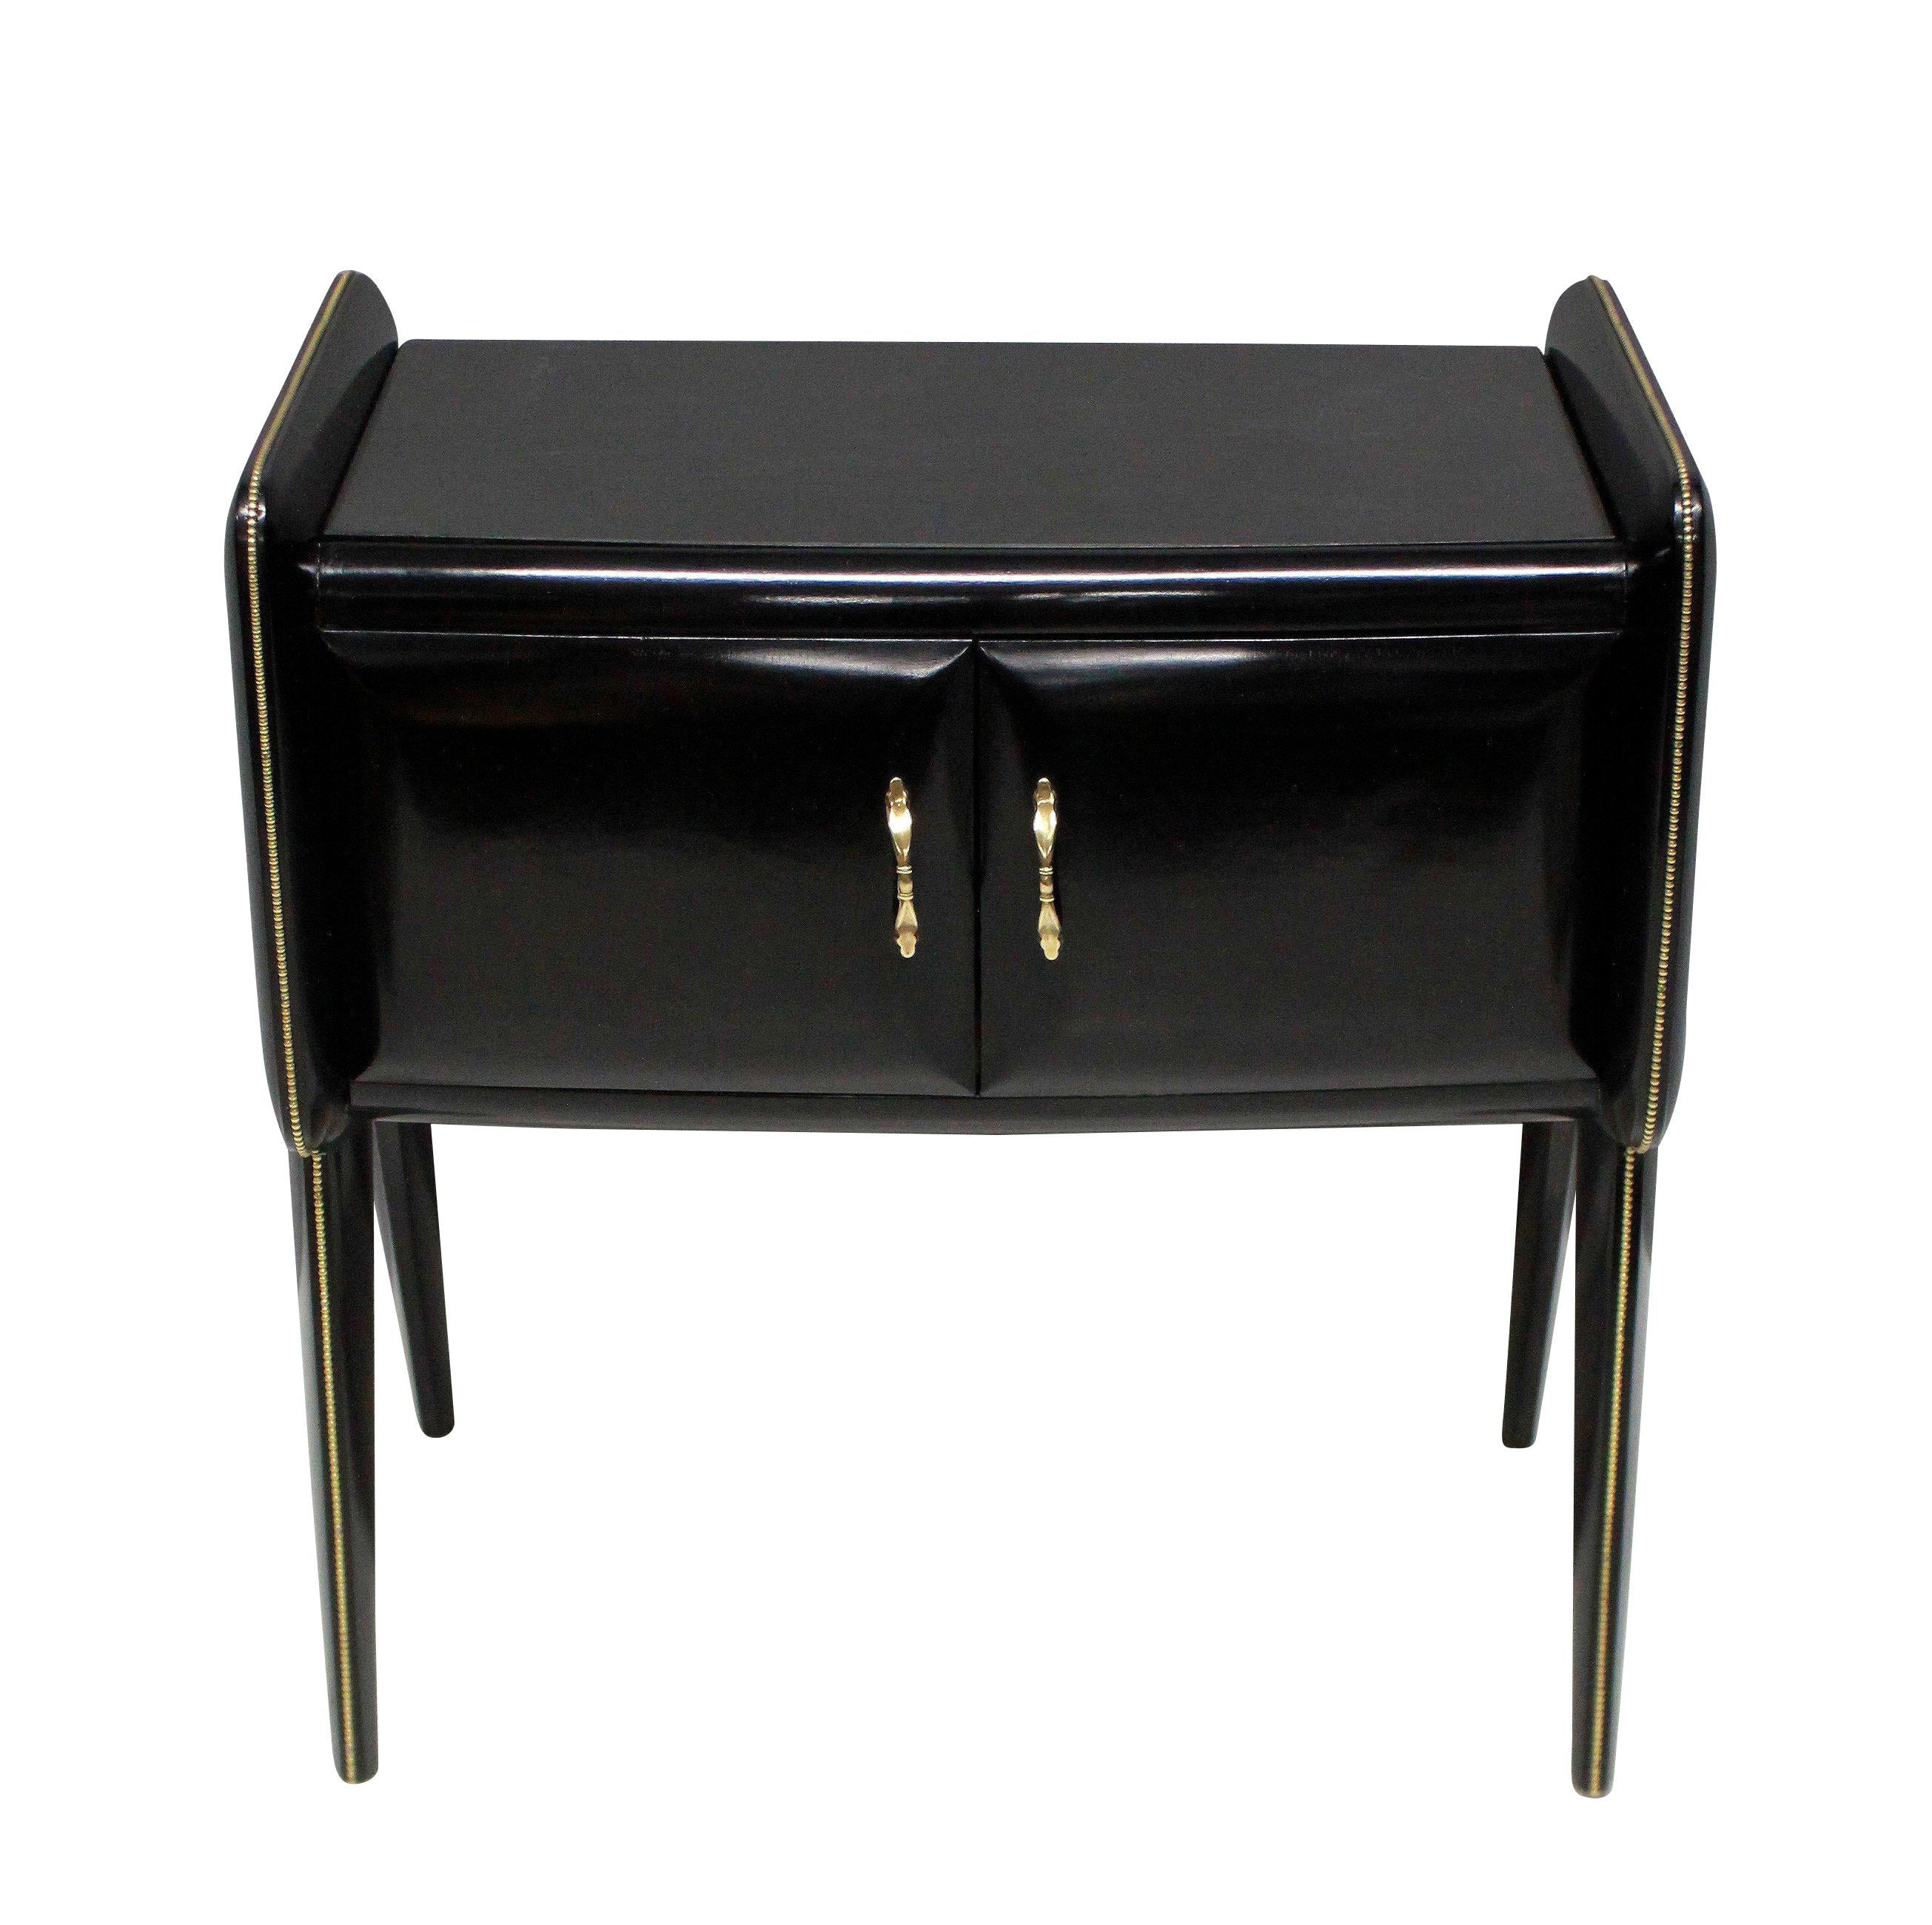 A pair of Italian midcentury ebonized nightstands with central cupboard, glass tops and attractive brass detailing.